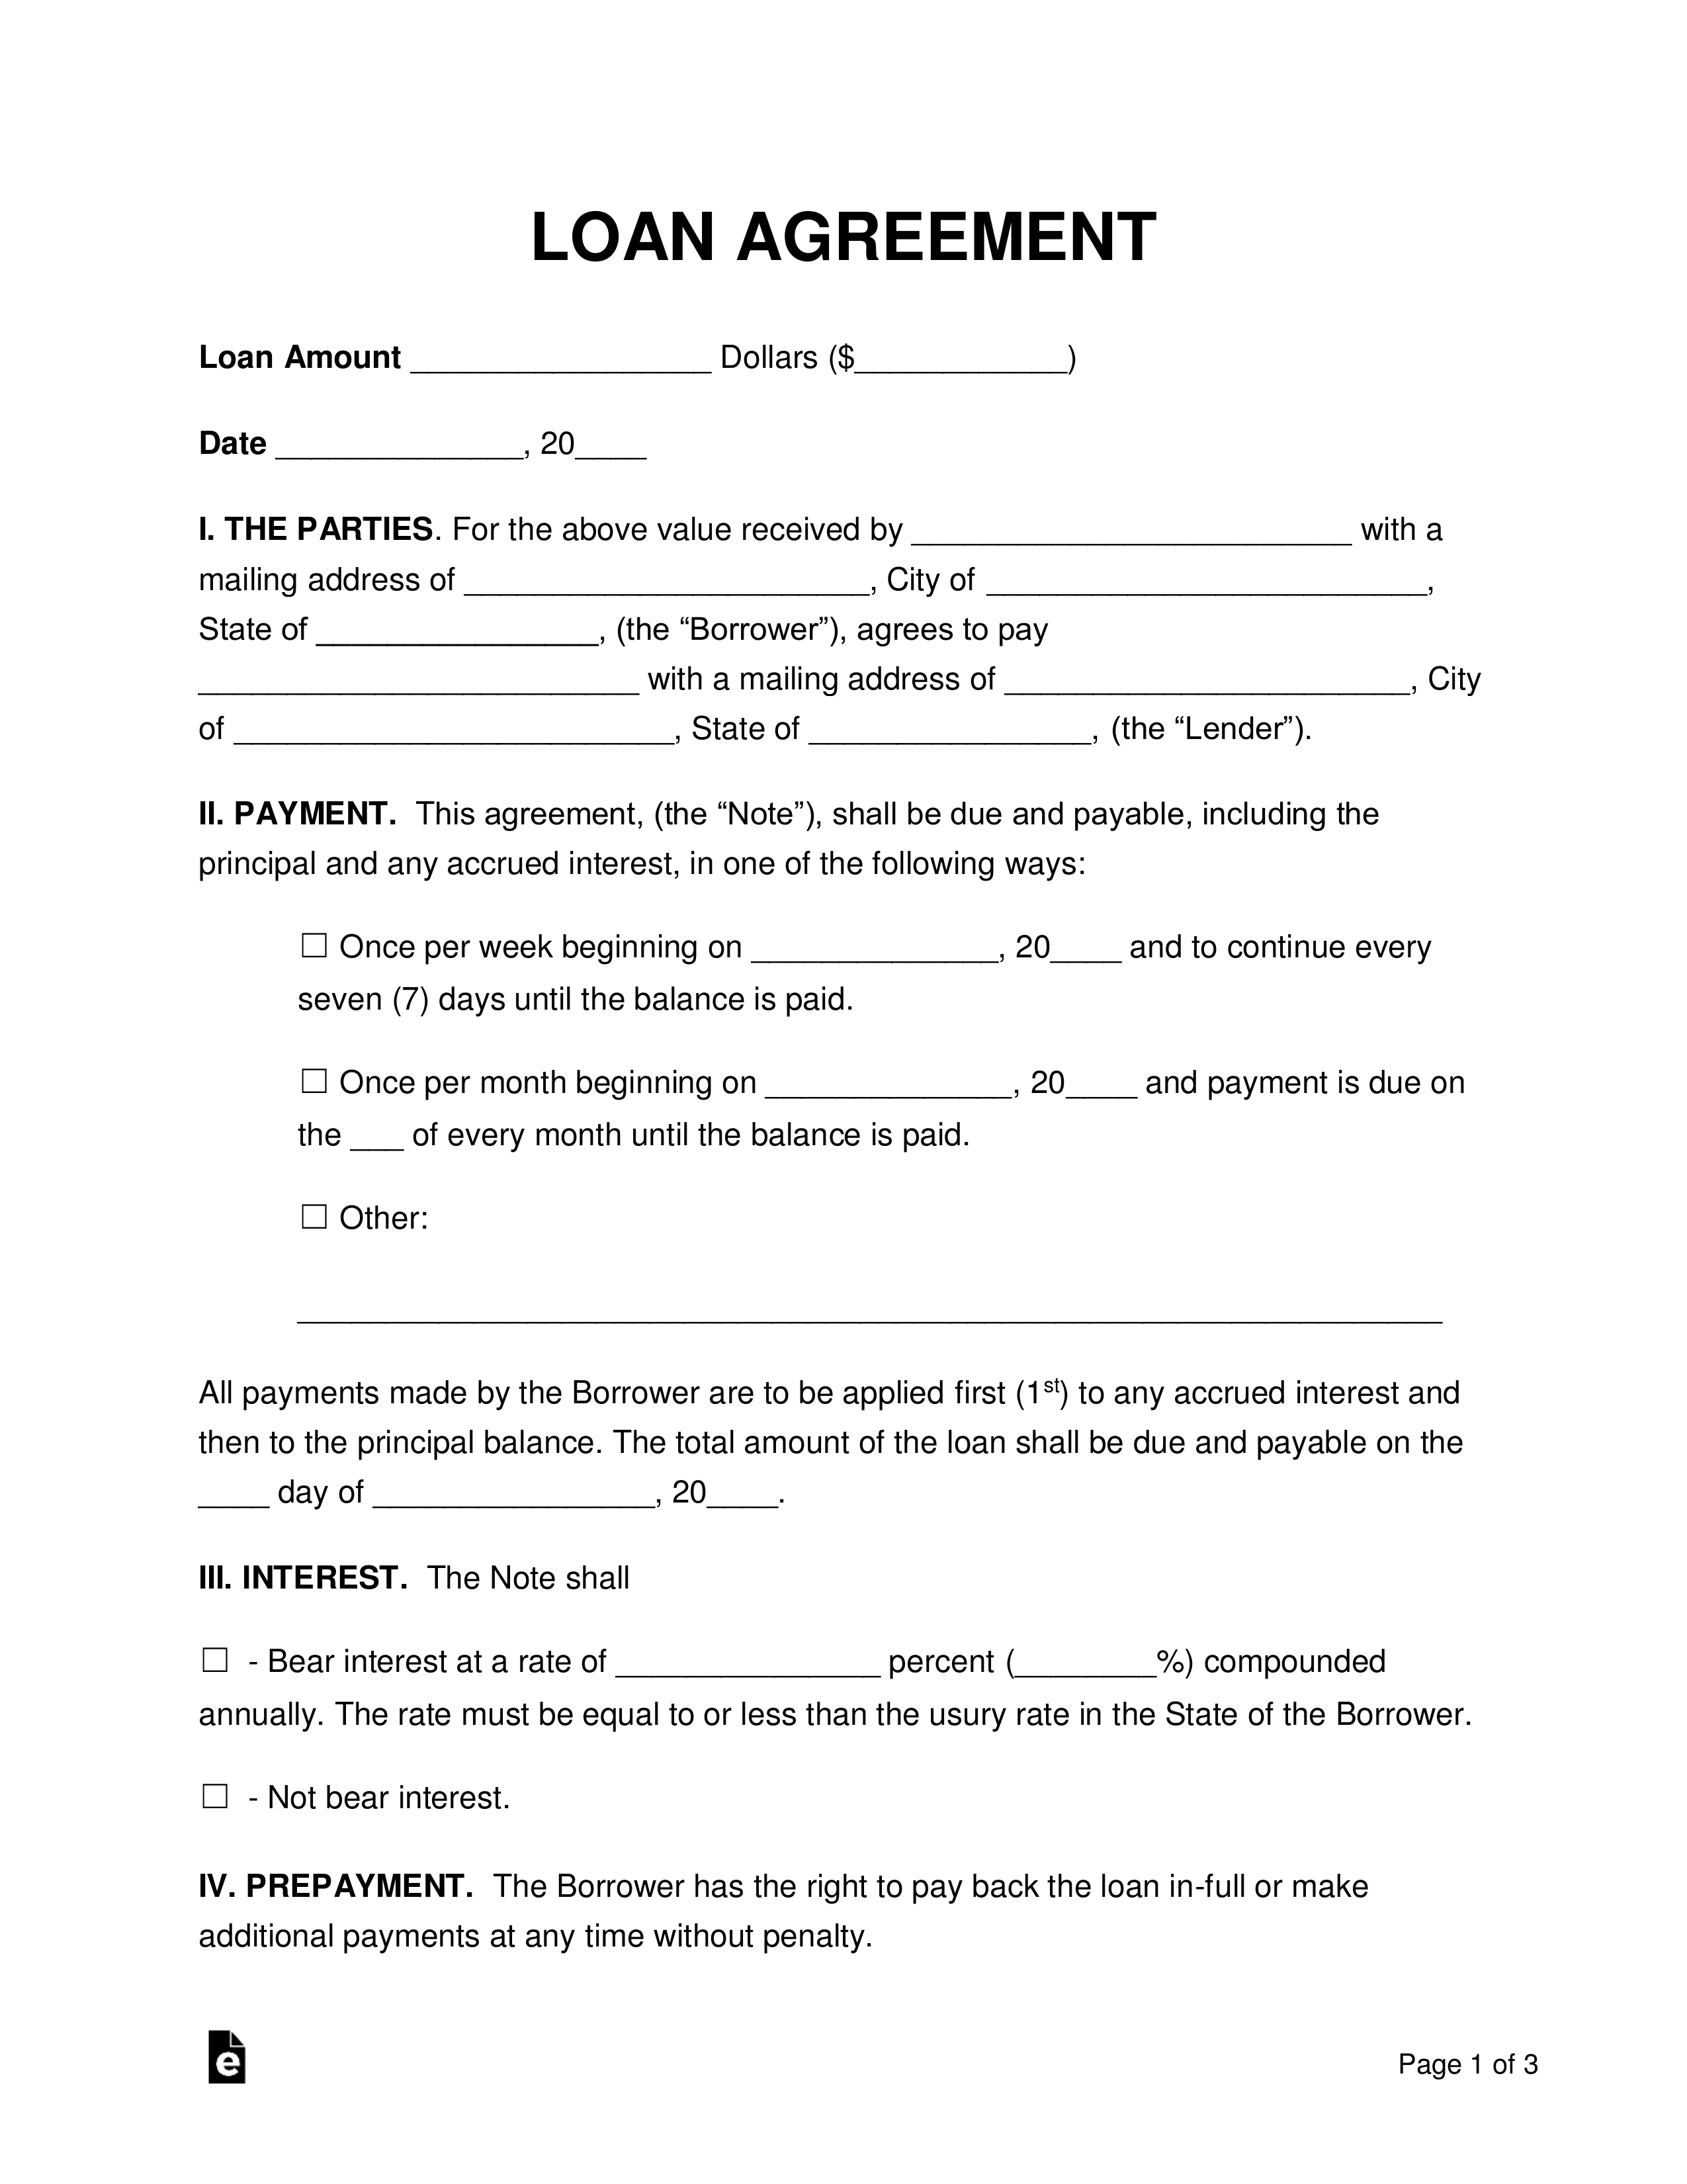 Free Loan Agreement Templates - Pdf | Word | Eforms – Free Pertaining To Blank Loan Agreement Template